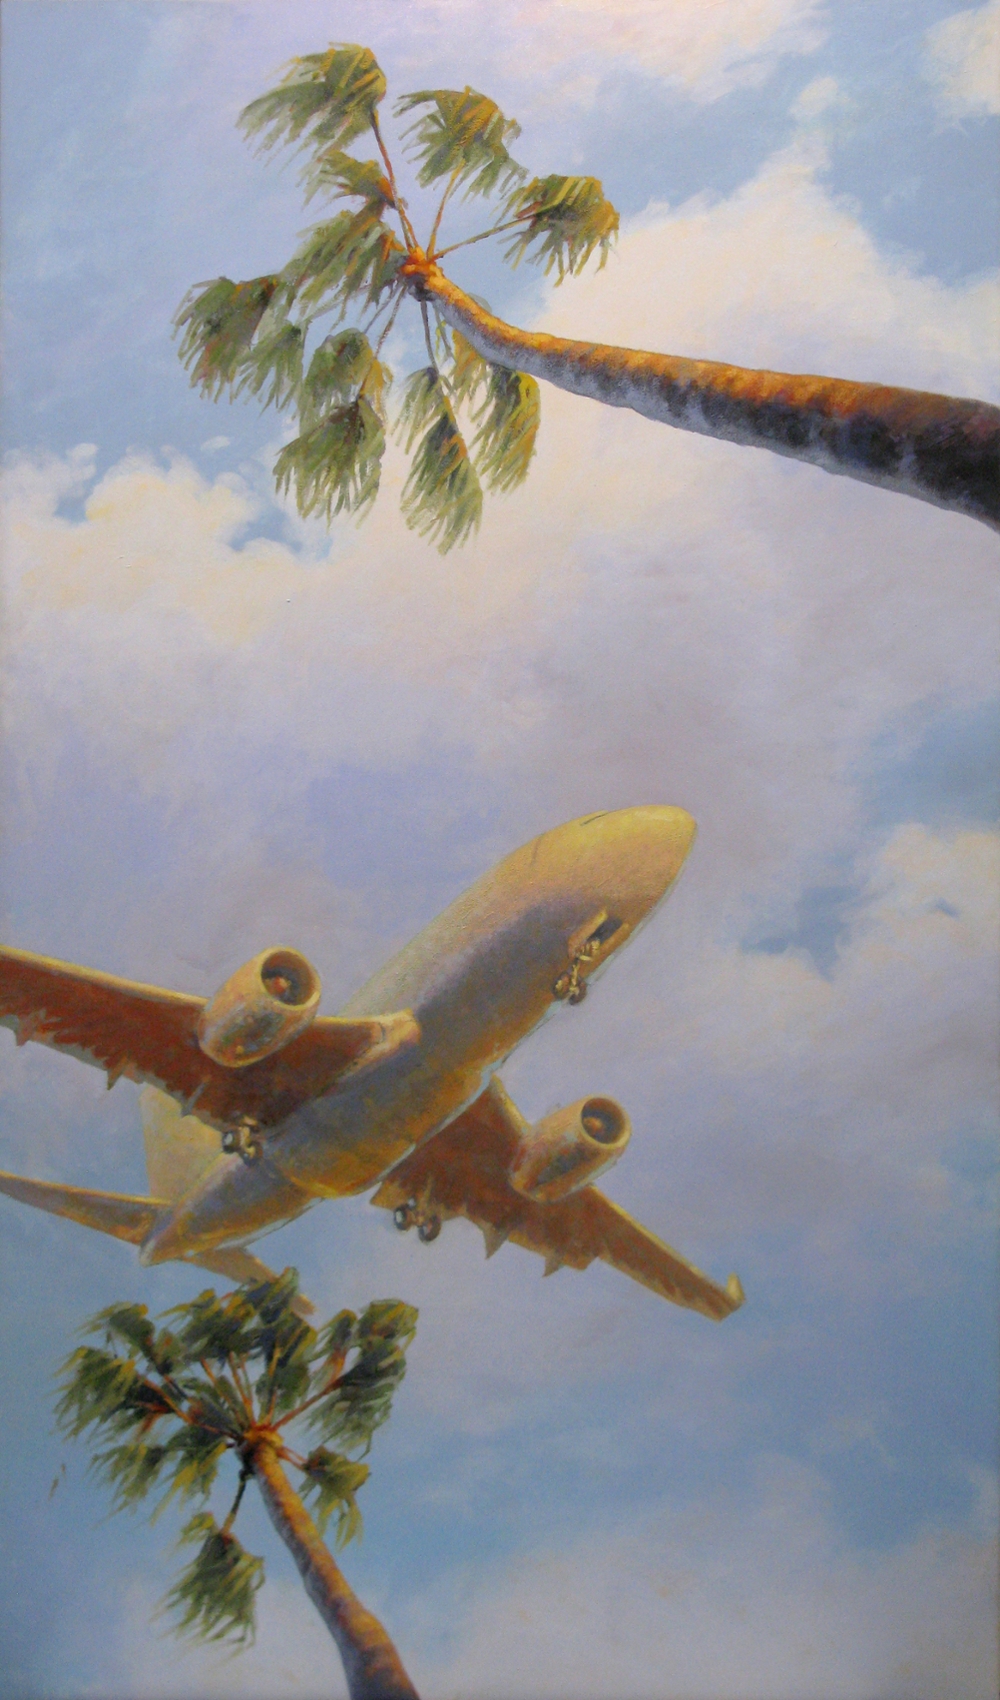 airliner between palms